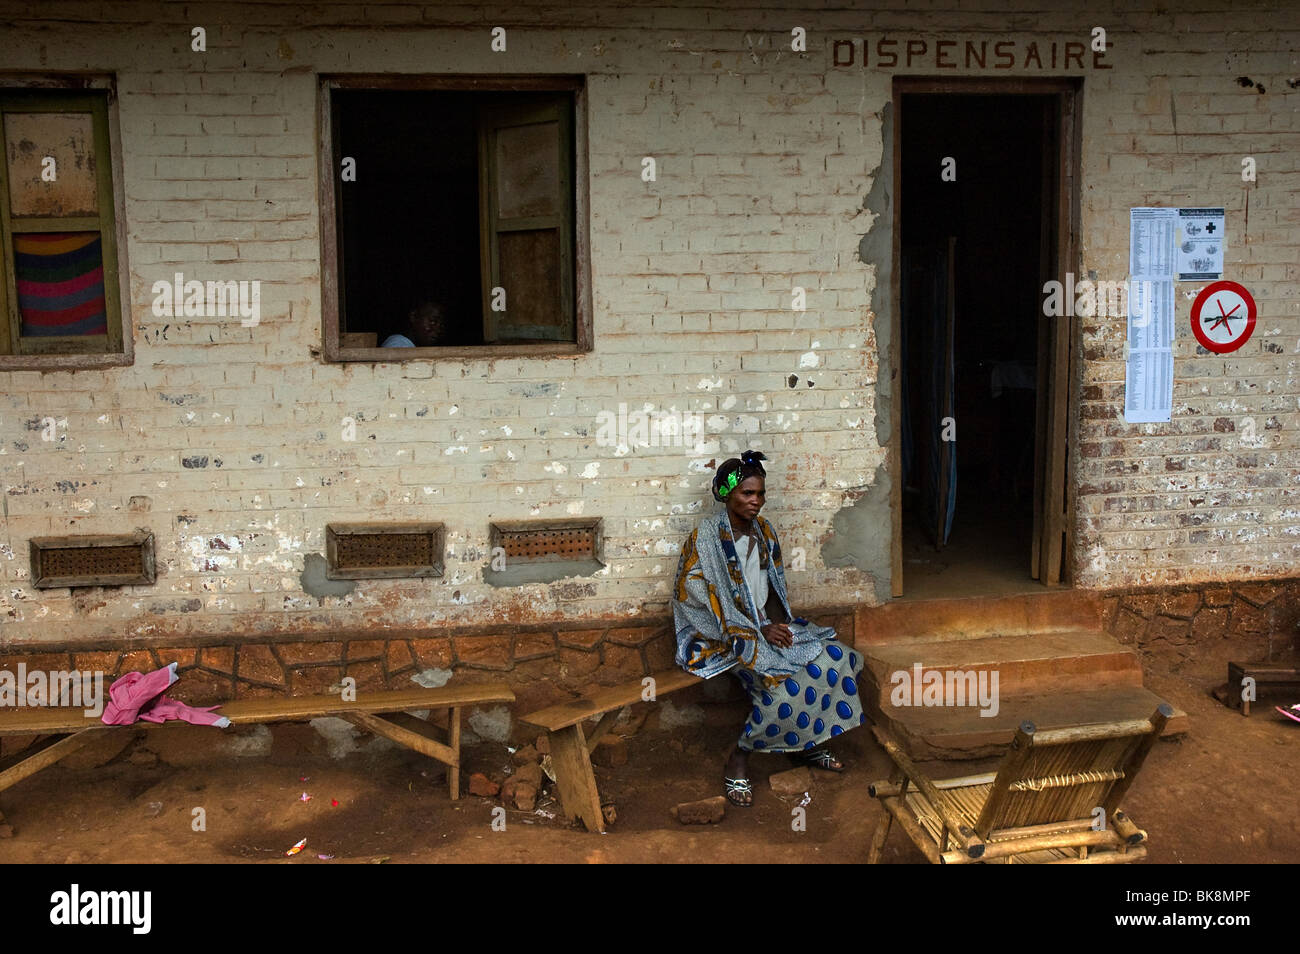 Last patient waiting for consultation in an african dispensary, health clinic, Stock Photo